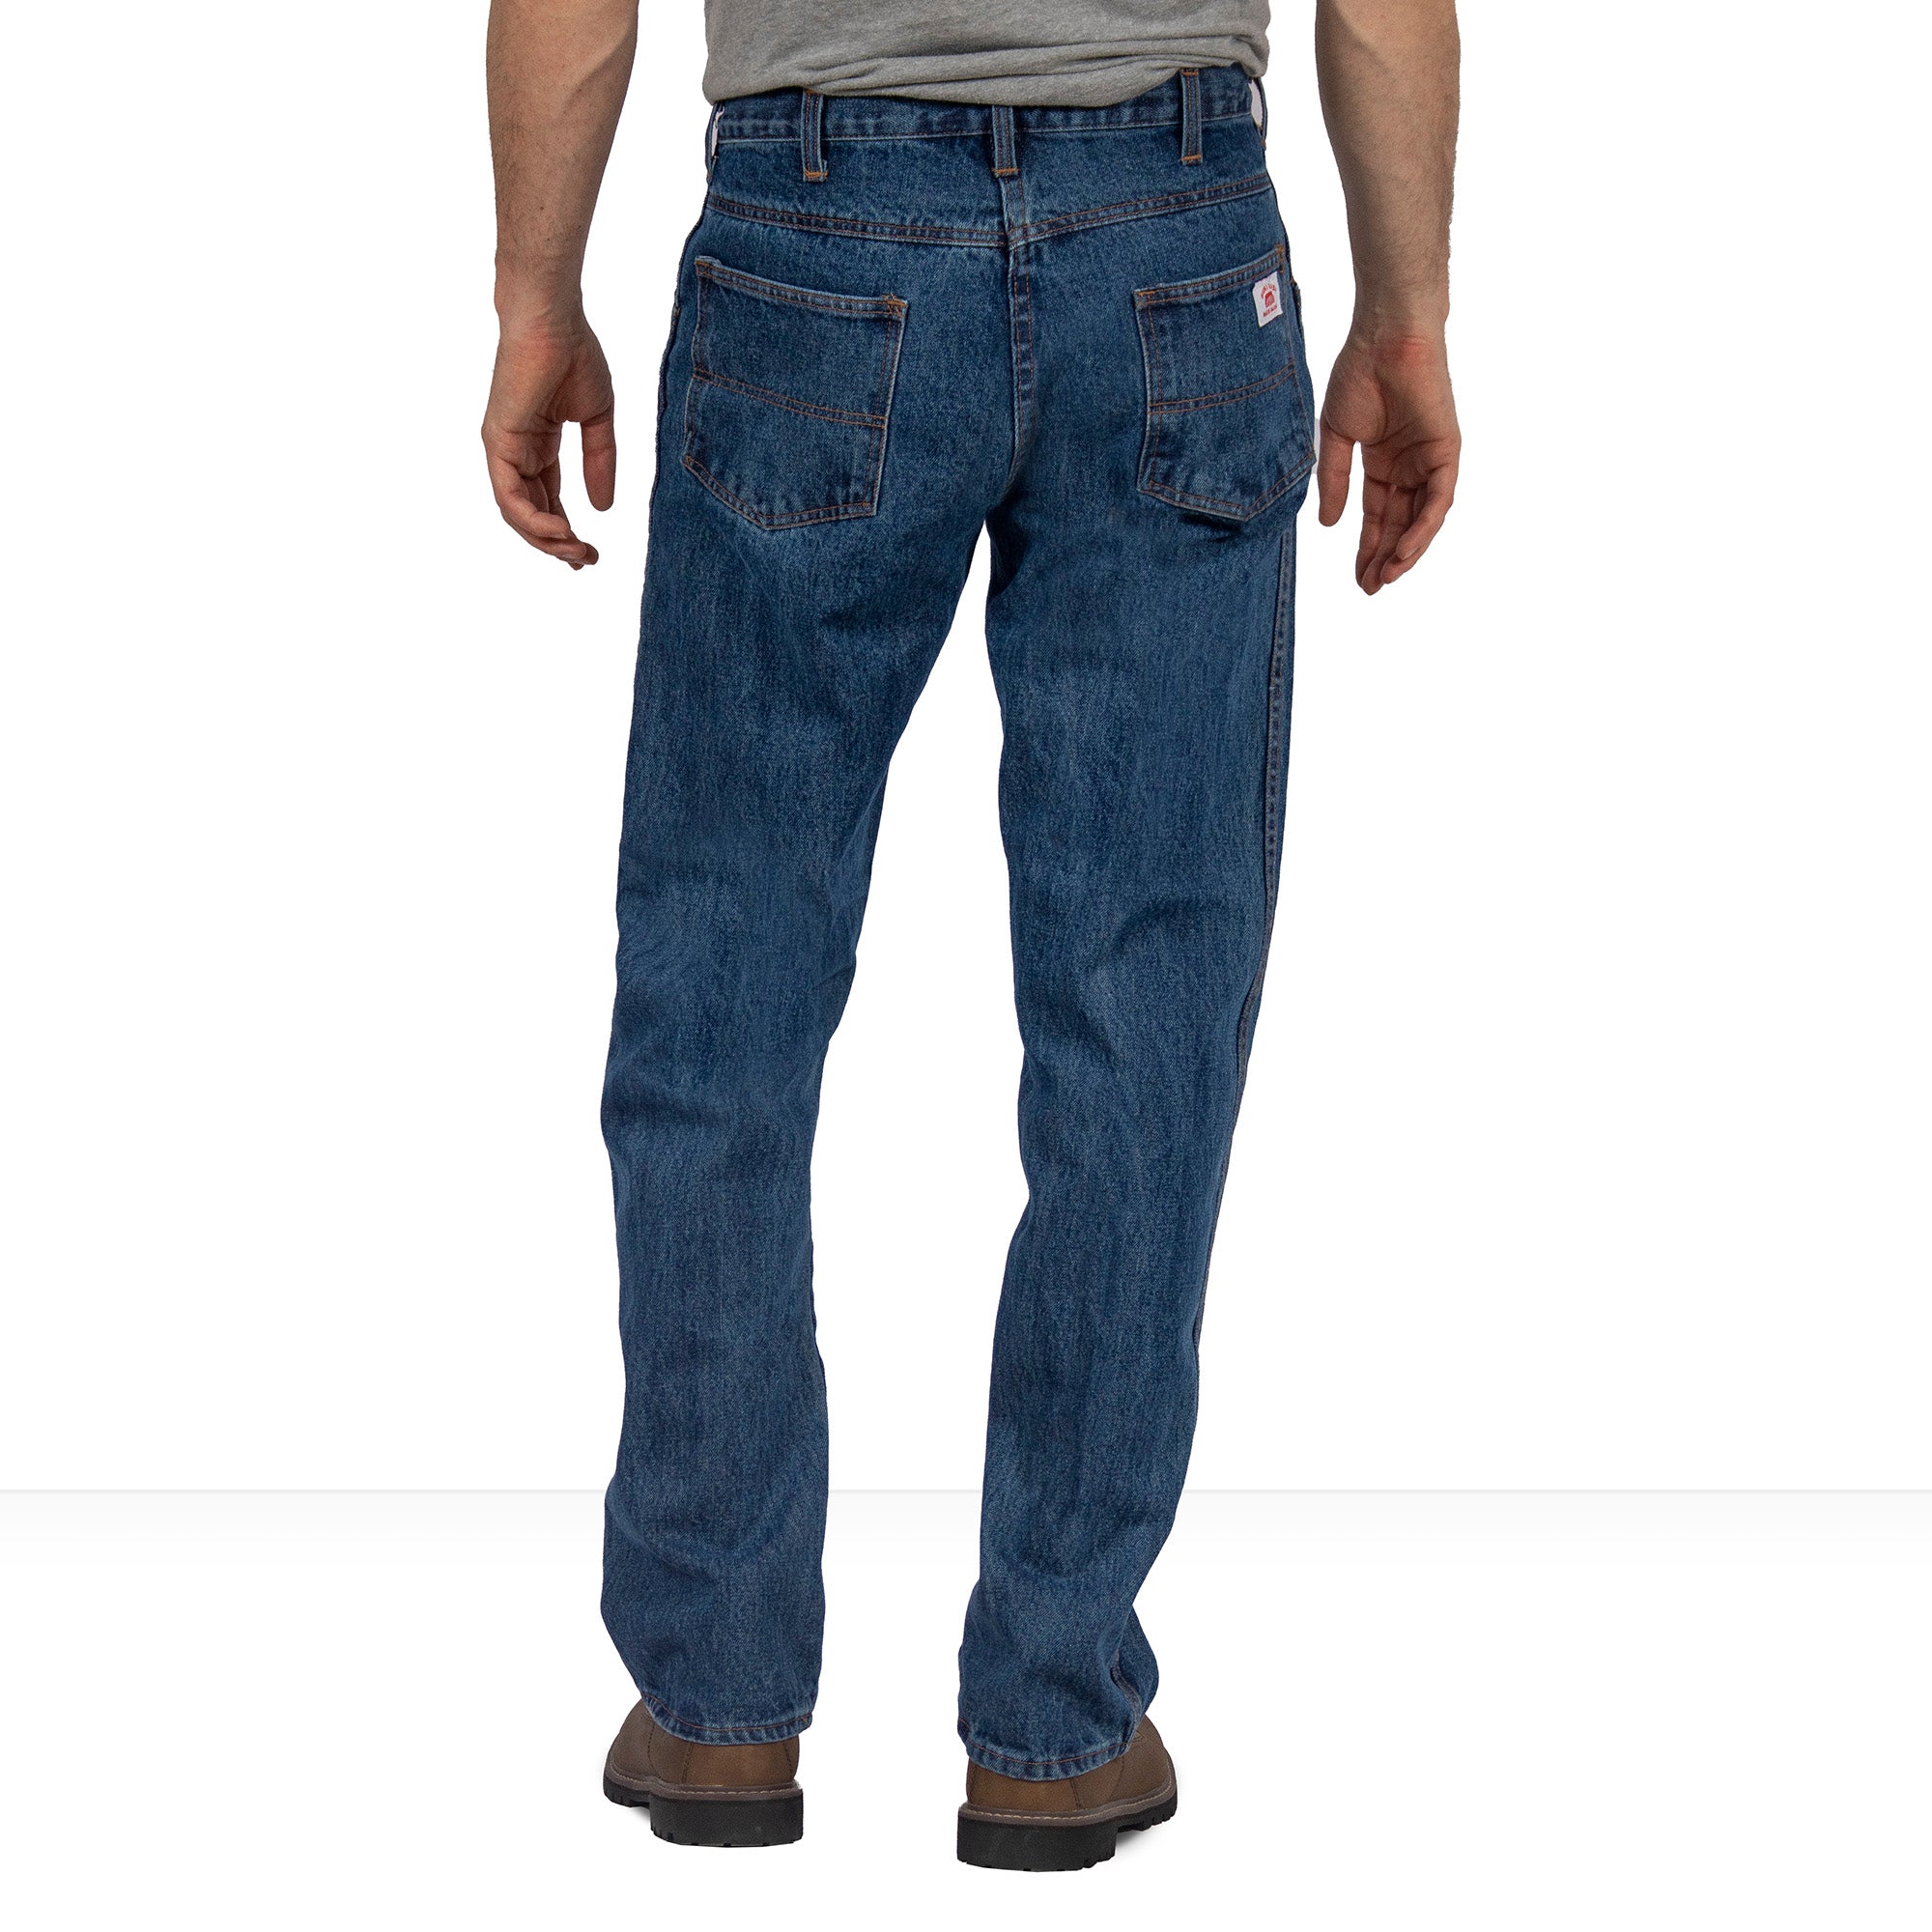 Relaxed Fit Jeans for Men | Shop Men's Relaxed Fit Jeans at Best Prices at  Pepe Jeans India!